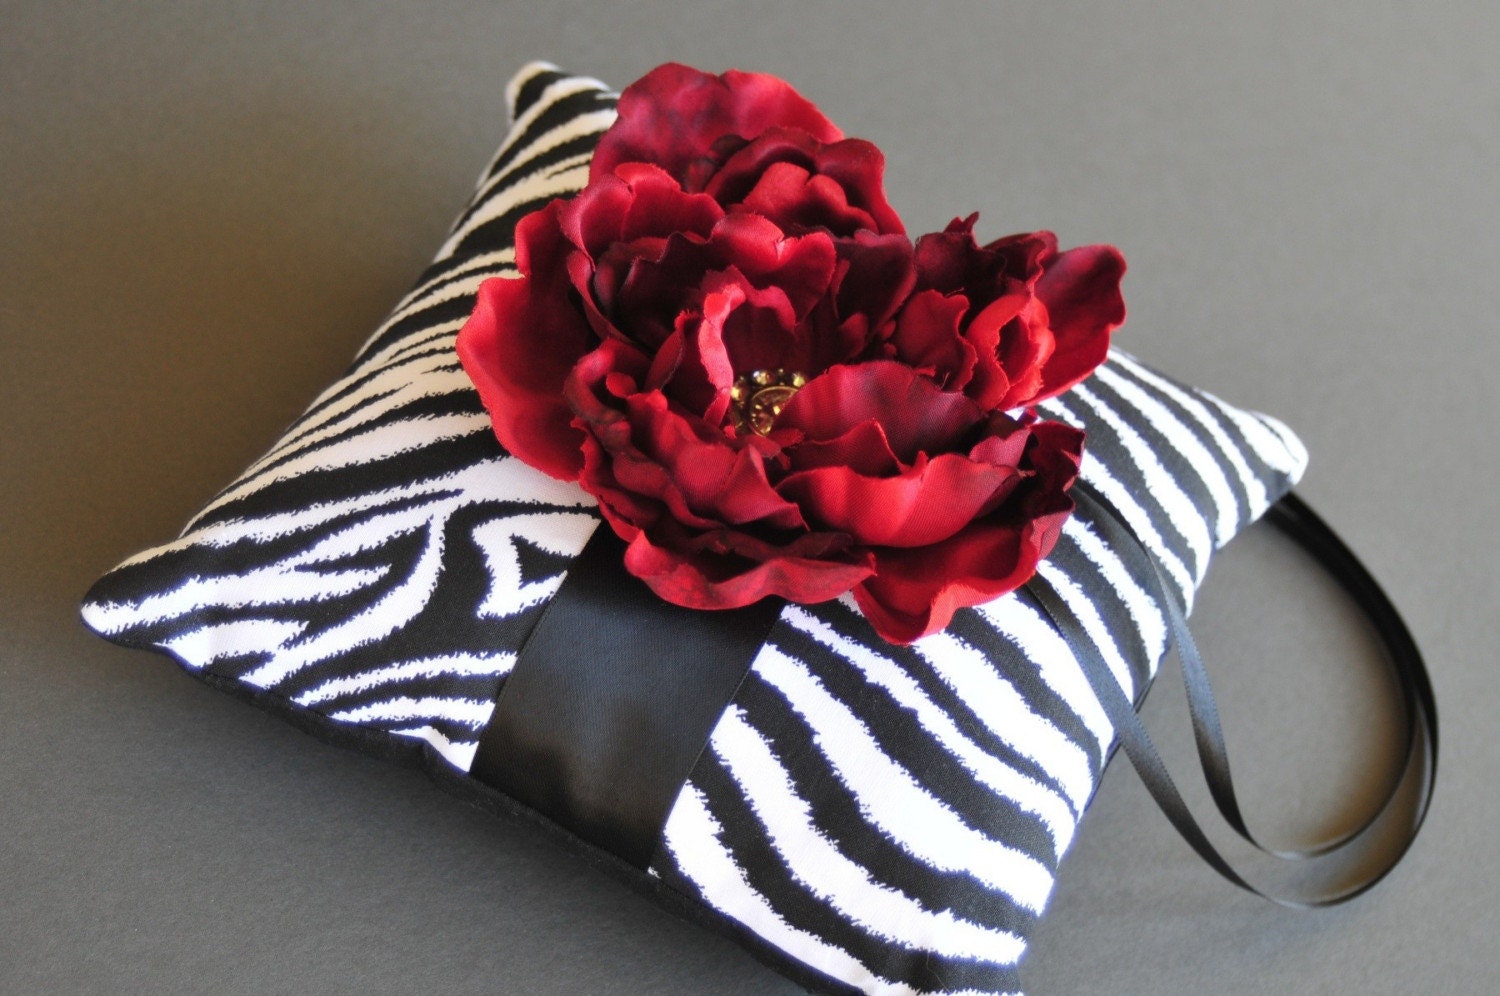 Ring Pillow in Zebra Print with Garnet Red Jeweled Flower